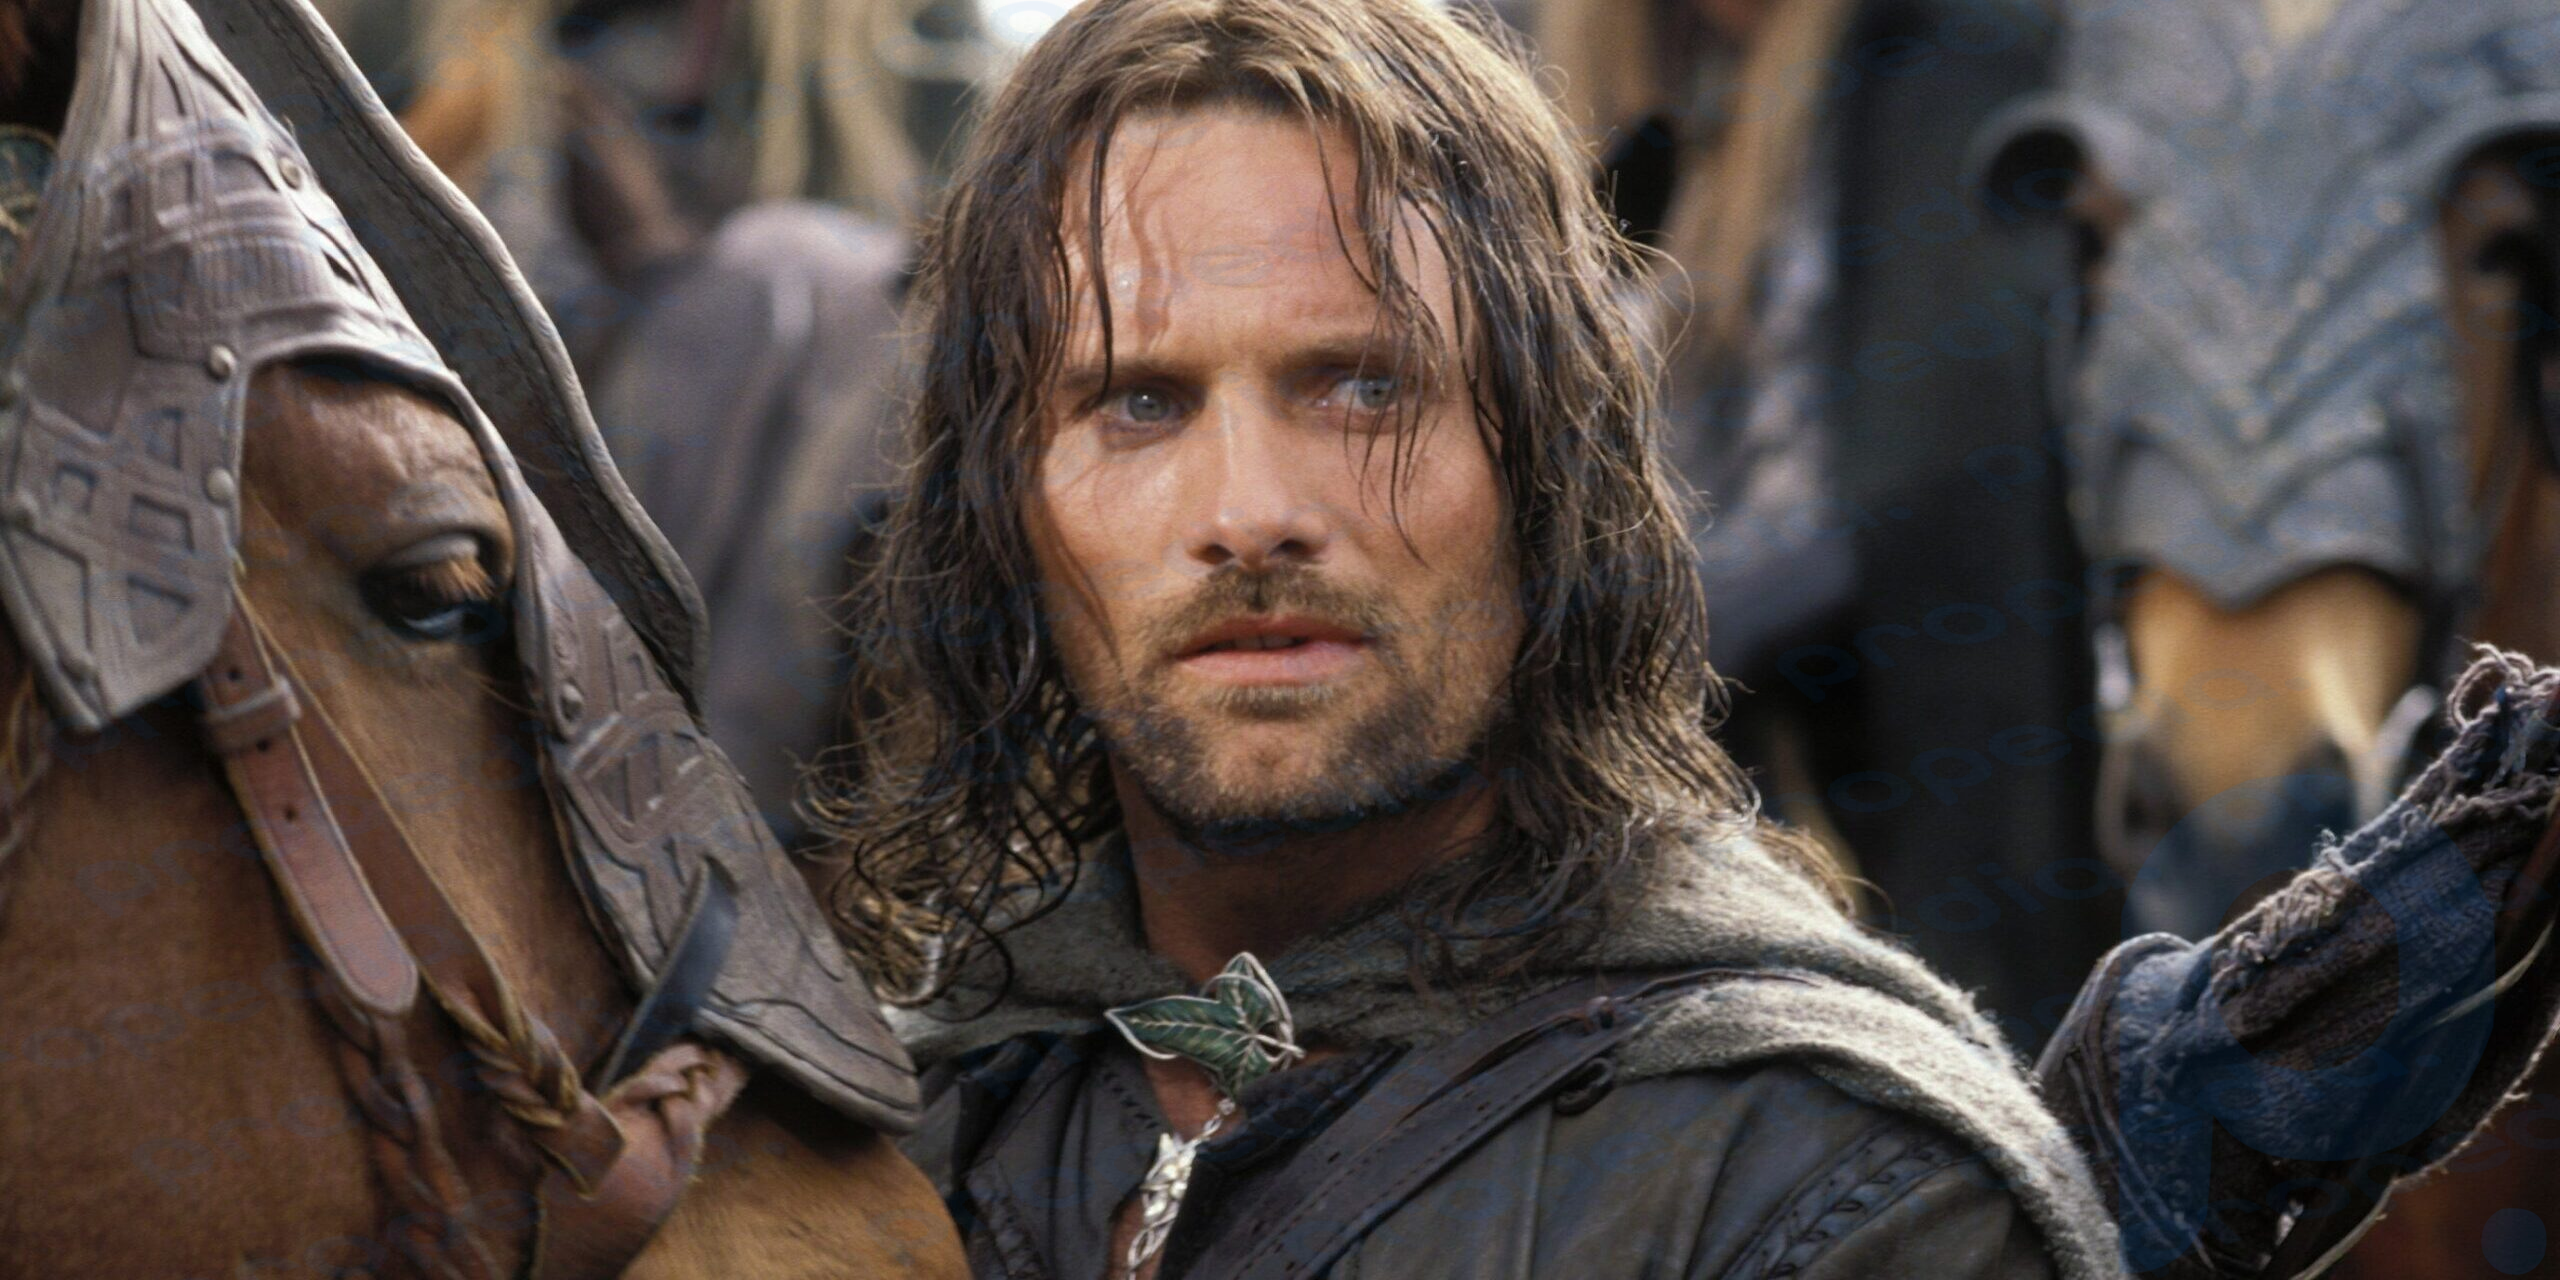 Aragorn from “The Lord of the Rings” instead of Ken: Margot Robbie named her crush in the movie